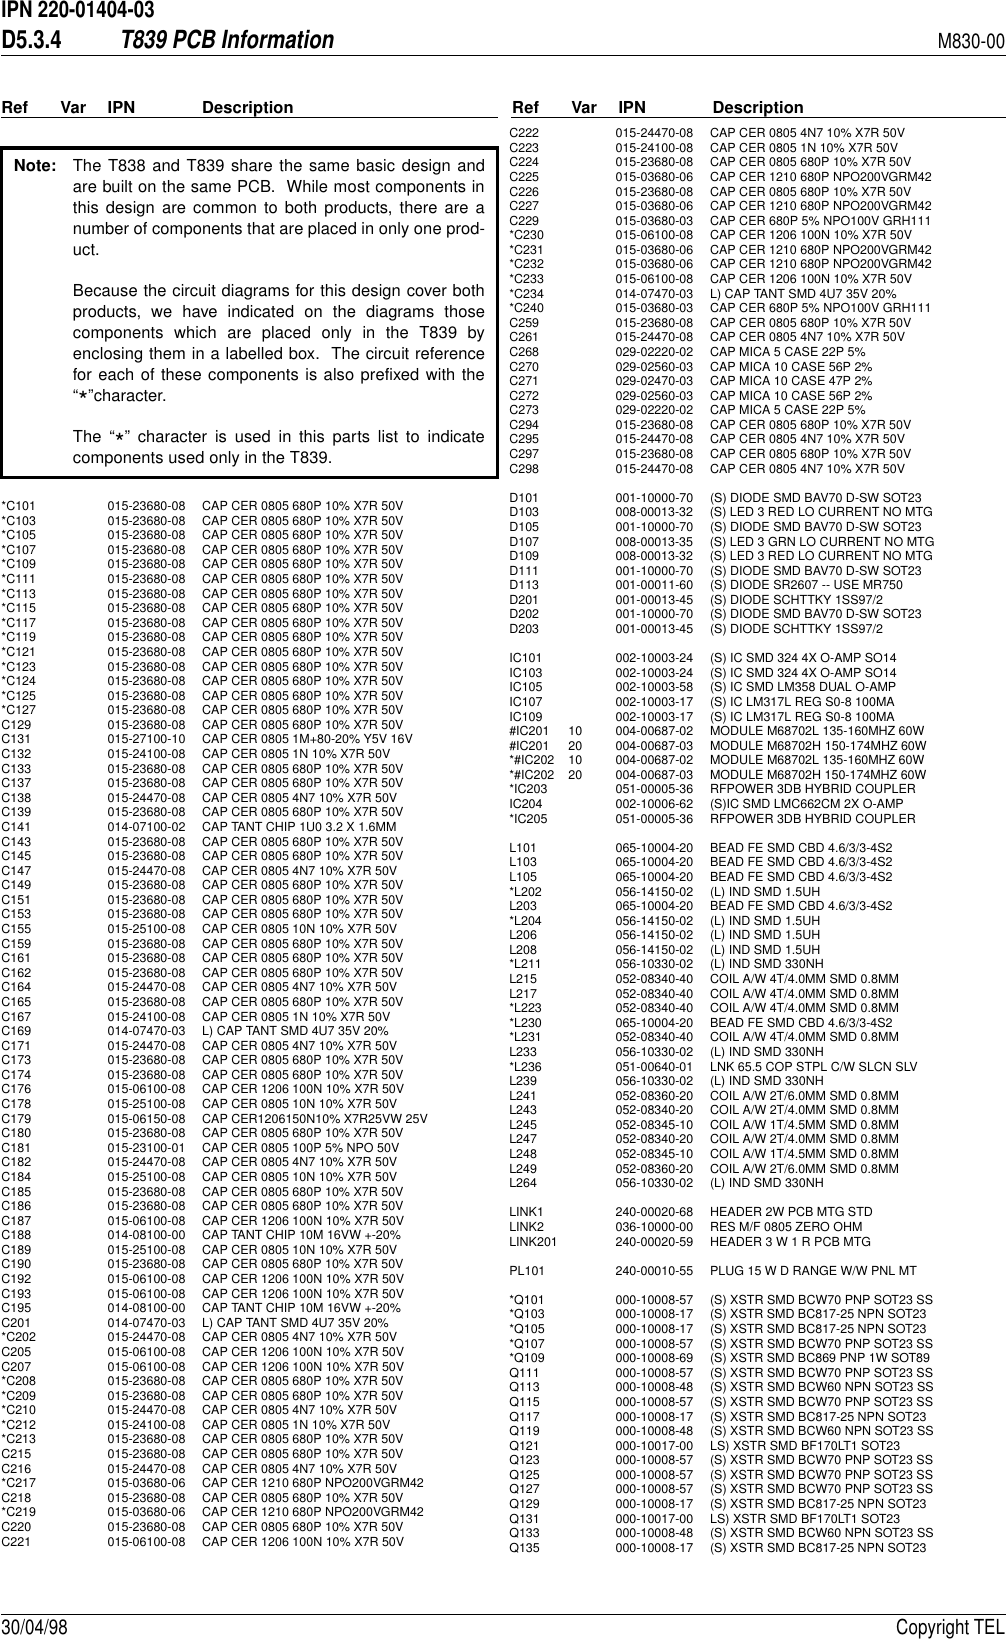 IPN 220-01404-03D5.3.4T839 PCB InformationM830-0030/04/98 Copyright TELRef Var IPN Description Ref Var IPN Description*C101 015-23680-08 CAP CER 0805 680P 10% X7R 50V*C103 015-23680-08 CAP CER 0805 680P 10% X7R 50V*C105 015-23680-08 CAP CER 0805 680P 10% X7R 50V*C107 015-23680-08 CAP CER 0805 680P 10% X7R 50V*C109 015-23680-08 CAP CER 0805 680P 10% X7R 50V*C111 015-23680-08 CAP CER 0805 680P 10% X7R 50V*C113 015-23680-08 CAP CER 0805 680P 10% X7R 50V*C115 015-23680-08 CAP CER 0805 680P 10% X7R 50V*C117 015-23680-08 CAP CER 0805 680P 10% X7R 50V*C119 015-23680-08 CAP CER 0805 680P 10% X7R 50V*C121 015-23680-08 CAP CER 0805 680P 10% X7R 50V*C123 015-23680-08 CAP CER 0805 680P 10% X7R 50V*C124 015-23680-08 CAP CER 0805 680P 10% X7R 50V*C125 015-23680-08 CAP CER 0805 680P 10% X7R 50V*C127 015-23680-08 CAP CER 0805 680P 10% X7R 50VC129 015-23680-08 CAP CER 0805 680P 10% X7R 50VC131 015-27100-10 CAP CER 0805 1M+80-20% Y5V 16VC132 015-24100-08 CAP CER 0805 1N 10% X7R 50VC133 015-23680-08 CAP CER 0805 680P 10% X7R 50VC137 015-23680-08 CAP CER 0805 680P 10% X7R 50VC138 015-24470-08 CAP CER 0805 4N7 10% X7R 50VC139 015-23680-08 CAP CER 0805 680P 10% X7R 50VC141 014-07100-02 CAP TANT CHIP 1U0 3.2 X 1.6MMC143 015-23680-08 CAP CER 0805 680P 10% X7R 50VC145 015-23680-08 CAP CER 0805 680P 10% X7R 50VC147 015-24470-08 CAP CER 0805 4N7 10% X7R 50VC149 015-23680-08 CAP CER 0805 680P 10% X7R 50VC151 015-23680-08 CAP CER 0805 680P 10% X7R 50VC153 015-23680-08 CAP CER 0805 680P 10% X7R 50VC155 015-25100-08 CAP CER 0805 10N 10% X7R 50VC159 015-23680-08 CAP CER 0805 680P 10% X7R 50VC161 015-23680-08 CAP CER 0805 680P 10% X7R 50VC162 015-23680-08 CAP CER 0805 680P 10% X7R 50VC164 015-24470-08 CAP CER 0805 4N7 10% X7R 50VC165 015-23680-08 CAP CER 0805 680P 10% X7R 50VC167 015-24100-08 CAP CER 0805 1N 10% X7R 50VC169 014-07470-03 L) CAP TANT SMD 4U7 35V 20%C171 015-24470-08 CAP CER 0805 4N7 10% X7R 50VC173 015-23680-08 CAP CER 0805 680P 10% X7R 50VC174 015-23680-08 CAP CER 0805 680P 10% X7R 50VC176 015-06100-08 CAP CER 1206 100N 10% X7R 50VC178 015-25100-08 CAP CER 0805 10N 10% X7R 50VC179 015-06150-08 CAP CER1206150N10% X7R25VW 25VC180 015-23680-08 CAP CER 0805 680P 10% X7R 50VC181 015-23100-01 CAP CER 0805 100P 5% NPO 50VC182 015-24470-08 CAP CER 0805 4N7 10% X7R 50VC184 015-25100-08 CAP CER 0805 10N 10% X7R 50VC185 015-23680-08 CAP CER 0805 680P 10% X7R 50VC186 015-23680-08 CAP CER 0805 680P 10% X7R 50VC187 015-06100-08 CAP CER 1206 100N 10% X7R 50VC188 014-08100-00 CAP TANT CHIP 10M 16VW +-20%C189 015-25100-08 CAP CER 0805 10N 10% X7R 50VC190 015-23680-08 CAP CER 0805 680P 10% X7R 50VC192 015-06100-08 CAP CER 1206 100N 10% X7R 50VC193 015-06100-08 CAP CER 1206 100N 10% X7R 50VC195 014-08100-00 CAP TANT CHIP 10M 16VW +-20%C201 014-07470-03 L) CAP TANT SMD 4U7 35V 20%*C202 015-24470-08 CAP CER 0805 4N7 10% X7R 50VC205 015-06100-08 CAP CER 1206 100N 10% X7R 50VC207 015-06100-08 CAP CER 1206 100N 10% X7R 50V*C208 015-23680-08 CAP CER 0805 680P 10% X7R 50V*C209 015-23680-08 CAP CER 0805 680P 10% X7R 50V*C210 015-24470-08 CAP CER 0805 4N7 10% X7R 50V*C212 015-24100-08 CAP CER 0805 1N 10% X7R 50V*C213 015-23680-08 CAP CER 0805 680P 10% X7R 50VC215 015-23680-08 CAP CER 0805 680P 10% X7R 50VC216 015-24470-08 CAP CER 0805 4N7 10% X7R 50V*C217 015-03680-06 CAP CER 1210 680P NPO200VGRM42C218 015-23680-08 CAP CER 0805 680P 10% X7R 50V*C219 015-03680-06 CAP CER 1210 680P NPO200VGRM42C220 015-23680-08 CAP CER 0805 680P 10% X7R 50VC221 015-06100-08 CAP CER 1206 100N 10% X7R 50VC222 015-24470-08 CAP CER 0805 4N7 10% X7R 50VC223 015-24100-08 CAP CER 0805 1N 10% X7R 50VC224 015-23680-08 CAP CER 0805 680P 10% X7R 50VC225 015-03680-06 CAP CER 1210 680P NPO200VGRM42C226 015-23680-08 CAP CER 0805 680P 10% X7R 50VC227 015-03680-06 CAP CER 1210 680P NPO200VGRM42C229 015-03680-03 CAP CER 680P 5% NPO100V GRH111*C230 015-06100-08 CAP CER 1206 100N 10% X7R 50V*C231 015-03680-06 CAP CER 1210 680P NPO200VGRM42*C232 015-03680-06 CAP CER 1210 680P NPO200VGRM42*C233 015-06100-08 CAP CER 1206 100N 10% X7R 50V*C234 014-07470-03 L) CAP TANT SMD 4U7 35V 20%*C240 015-03680-03 CAP CER 680P 5% NPO100V GRH111C259 015-23680-08 CAP CER 0805 680P 10% X7R 50VC261 015-24470-08 CAP CER 0805 4N7 10% X7R 50VC268 029-02220-02 CAP MICA 5 CASE 22P 5%C270 029-02560-03 CAP MICA 10 CASE 56P 2%C271 029-02470-03 CAP MICA 10 CASE 47P 2%C272 029-02560-03 CAP MICA 10 CASE 56P 2%C273 029-02220-02 CAP MICA 5 CASE 22P 5%C294 015-23680-08 CAP CER 0805 680P 10% X7R 50VC295 015-24470-08 CAP CER 0805 4N7 10% X7R 50VC297 015-23680-08 CAP CER 0805 680P 10% X7R 50VC298 015-24470-08 CAP CER 0805 4N7 10% X7R 50VD101 001-10000-70 (S) DIODE SMD BAV70 D-SW SOT23D103 008-00013-32 (S) LED 3 RED LO CURRENT NO MTGD105 001-10000-70 (S) DIODE SMD BAV70 D-SW SOT23D107 008-00013-35 (S) LED 3 GRN LO CURRENT NO MTGD109 008-00013-32 (S) LED 3 RED LO CURRENT NO MTGD111 001-10000-70 (S) DIODE SMD BAV70 D-SW SOT23D113 001-00011-60 (S) DIODE SR2607 -- USE MR750D201 001-00013-45 (S) DIODE SCHTTKY 1SS97/2D202 001-10000-70 (S) DIODE SMD BAV70 D-SW SOT23D203 001-00013-45 (S) DIODE SCHTTKY 1SS97/2IC101 002-10003-24 (S) IC SMD 324 4X O-AMP SO14IC103 002-10003-24 (S) IC SMD 324 4X O-AMP SO14IC105 002-10003-58 (S) IC SMD LM358 DUAL O-AMPIC107 002-10003-17 (S) IC LM317L REG S0-8 100MAIC109 002-10003-17 (S) IC LM317L REG S0-8 100MA#IC201 10 004-00687-02 MODULE M68702L 135-160MHZ 60W#IC201 20 004-00687-03 MODULE M68702H 150-174MHZ 60W*#IC202 10 004-00687-02 MODULE M68702L 135-160MHZ 60W*#IC202 20 004-00687-03 MODULE M68702H 150-174MHZ 60W*IC203 051-00005-36 RFPOWER 3DB HYBRID COUPLERIC204 002-10006-62 (S)IC SMD LMC662CM 2X O-AMP*IC205 051-00005-36 RFPOWER 3DB HYBRID COUPLERL101 065-10004-20 BEAD FE SMD CBD 4.6/3/3-4S2L103 065-10004-20 BEAD FE SMD CBD 4.6/3/3-4S2L105 065-10004-20 BEAD FE SMD CBD 4.6/3/3-4S2*L202 056-14150-02 (L) IND SMD 1.5UHL203 065-10004-20 BEAD FE SMD CBD 4.6/3/3-4S2*L204 056-14150-02 (L) IND SMD 1.5UHL206 056-14150-02 (L) IND SMD 1.5UHL208 056-14150-02 (L) IND SMD 1.5UH*L211 056-10330-02 (L) IND SMD 330NHL215 052-08340-40 COIL A/W 4T/4.0MM SMD 0.8MML217 052-08340-40 COIL A/W 4T/4.0MM SMD 0.8MM*L223 052-08340-40 COIL A/W 4T/4.0MM SMD 0.8MM*L230 065-10004-20 BEAD FE SMD CBD 4.6/3/3-4S2*L231 052-08340-40 COIL A/W 4T/4.0MM SMD 0.8MML233 056-10330-02 (L) IND SMD 330NH*L236 051-00640-01 LNK 65.5 COP STPL C/W SLCN SLVL239 056-10330-02 (L) IND SMD 330NHL241 052-08360-20 COIL A/W 2T/6.0MM SMD 0.8MML243 052-08340-20 COIL A/W 2T/4.0MM SMD 0.8MML245 052-08345-10 COIL A/W 1T/4.5MM SMD 0.8MML247 052-08340-20 COIL A/W 2T/4.0MM SMD 0.8MML248 052-08345-10 COIL A/W 1T/4.5MM SMD 0.8MML249 052-08360-20 COIL A/W 2T/6.0MM SMD 0.8MML264 056-10330-02 (L) IND SMD 330NHLINK1 240-00020-68 HEADER 2W PCB MTG STDLINK2 036-10000-00 RES M/F 0805 ZERO OHMLINK201 240-00020-59 HEADER 3 W 1 R PCB MTGPL101 240-00010-55 PLUG 15 W D RANGE W/W PNL MT*Q101 000-10008-57 (S) XSTR SMD BCW70 PNP SOT23 SS*Q103 000-10008-17 (S) XSTR SMD BC817-25 NPN SOT23*Q105 000-10008-17 (S) XSTR SMD BC817-25 NPN SOT23*Q107 000-10008-57 (S) XSTR SMD BCW70 PNP SOT23 SS*Q109 000-10008-69 (S) XSTR SMD BC869 PNP 1W SOT89Q111 000-10008-57 (S) XSTR SMD BCW70 PNP SOT23 SSQ113 000-10008-48 (S) XSTR SMD BCW60 NPN SOT23 SSQ115 000-10008-57 (S) XSTR SMD BCW70 PNP SOT23 SSQ117 000-10008-17 (S) XSTR SMD BC817-25 NPN SOT23Q119 000-10008-48 (S) XSTR SMD BCW60 NPN SOT23 SSQ121 000-10017-00 LS) XSTR SMD BF170LT1 SOT23Q123 000-10008-57 (S) XSTR SMD BCW70 PNP SOT23 SSQ125 000-10008-57 (S) XSTR SMD BCW70 PNP SOT23 SSQ127 000-10008-57 (S) XSTR SMD BCW70 PNP SOT23 SSQ129 000-10008-17 (S) XSTR SMD BC817-25 NPN SOT23Q131 000-10017-00 LS) XSTR SMD BF170LT1 SOT23Q133 000-10008-48 (S) XSTR SMD BCW60 NPN SOT23 SSQ135 000-10008-17 (S) XSTR SMD BC817-25 NPN SOT23Note: The T838 and T839 share the same basic design andare built on the same PCB.  While most components inthis design are common to both products, there are anumber of components that are placed in only one prod-uct.  Because the circuit diagrams for this design cover bothproducts, we have indicated on the diagrams thosecomponents which are placed only in the T839 byenclosing them in a labelled box.  The circuit referencefor each of these components is also prefixed with the“*”character.The “*” character is used in this parts list to indicatecomponents used only in the T839.